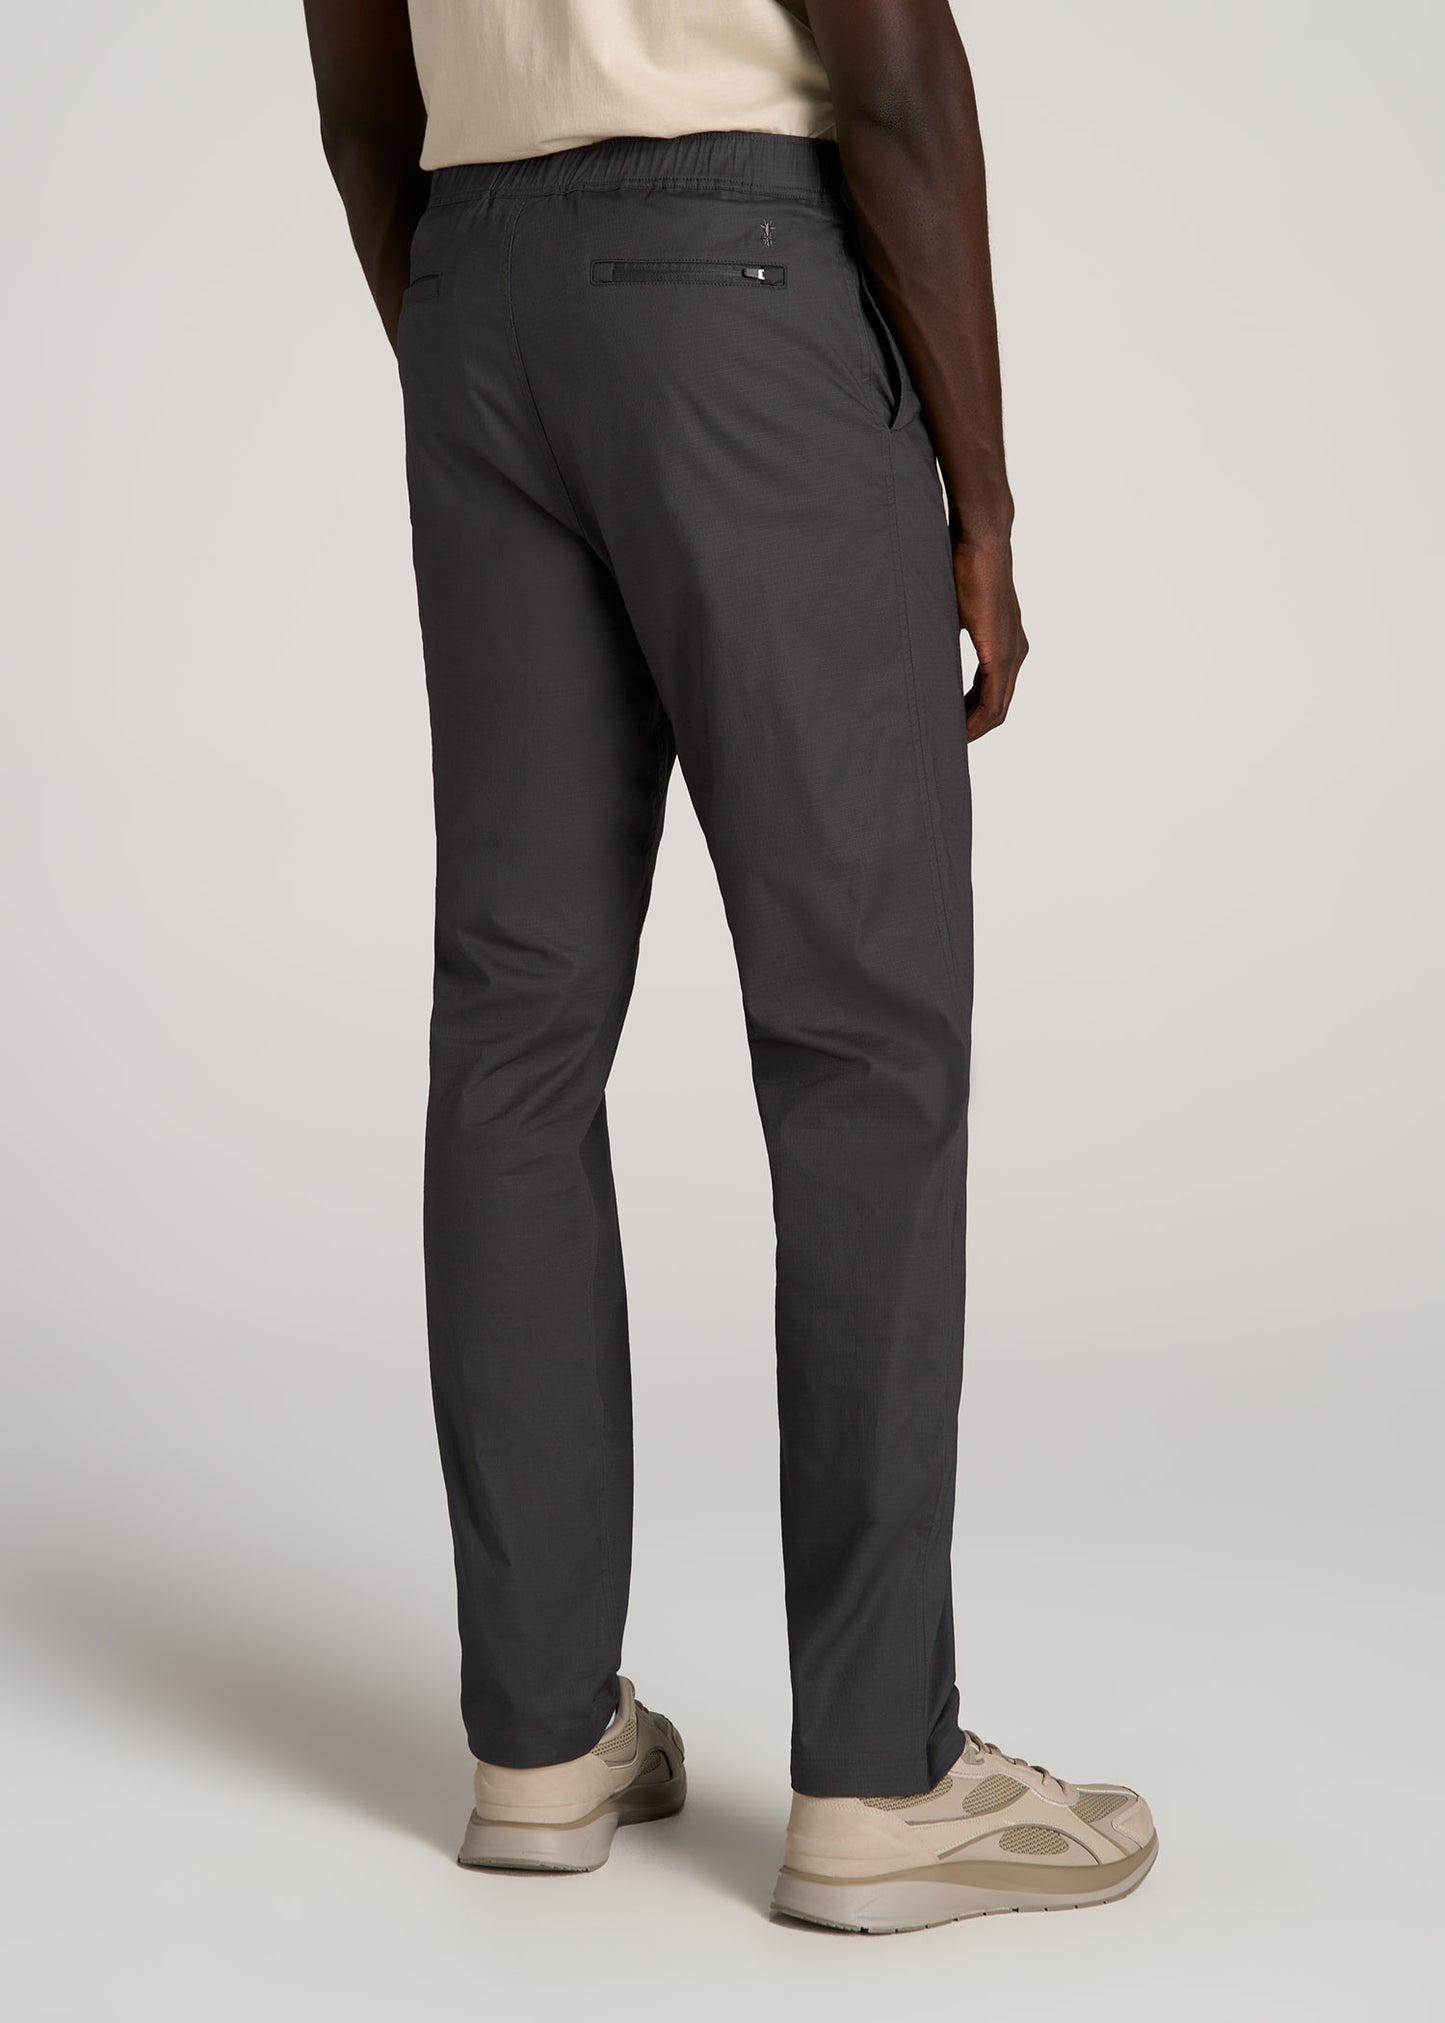 Ripstop Pants for Tall Men | American Tall